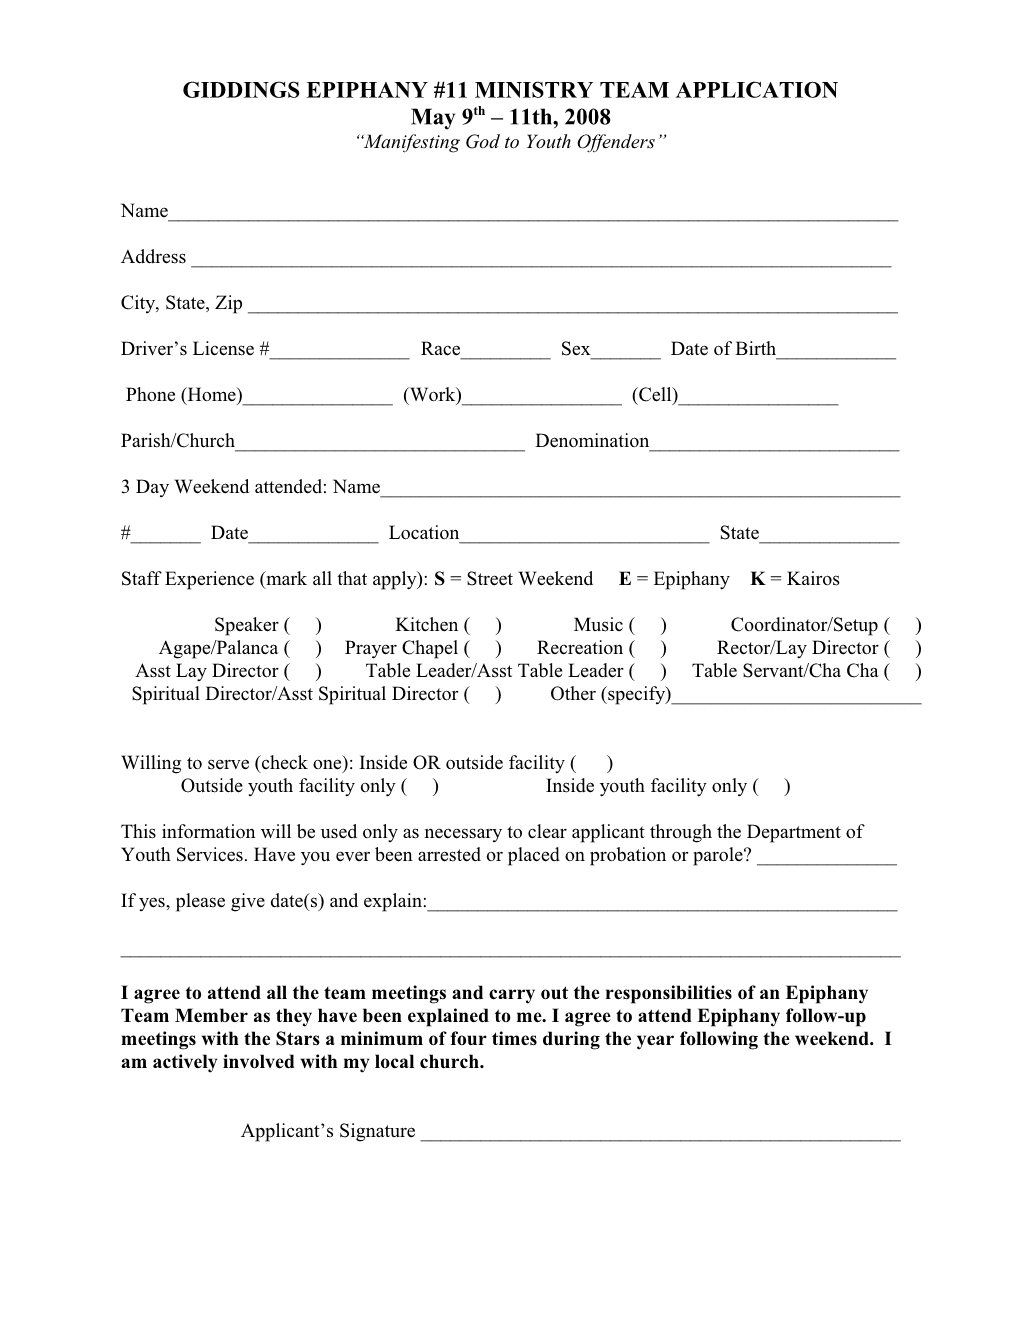 Epiphany Ministry Team Application